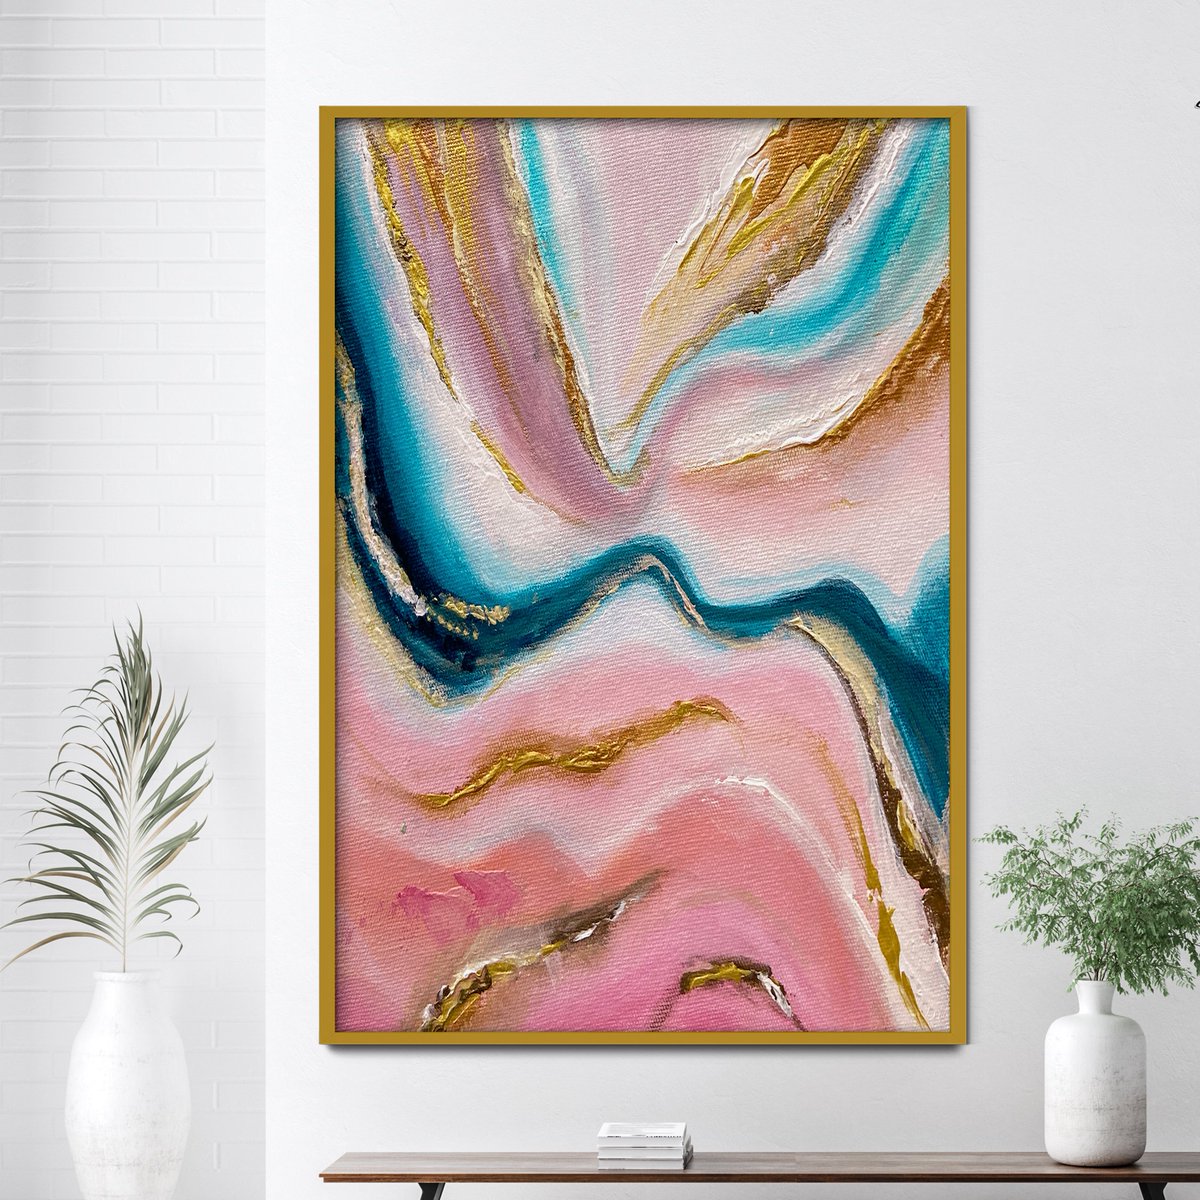 A minimalistic acrylic canvas wall art abstract painting featuring blue and pink lines
FREE Global Shipping Available, Purchase Here
krivaarthouse.etsy.com/uk/listing/152…
#bluepinkart #minimalpainting #abstractpainting #brushstrokes #homedecor #artistontwittter #artgallery #artwork #artlovers